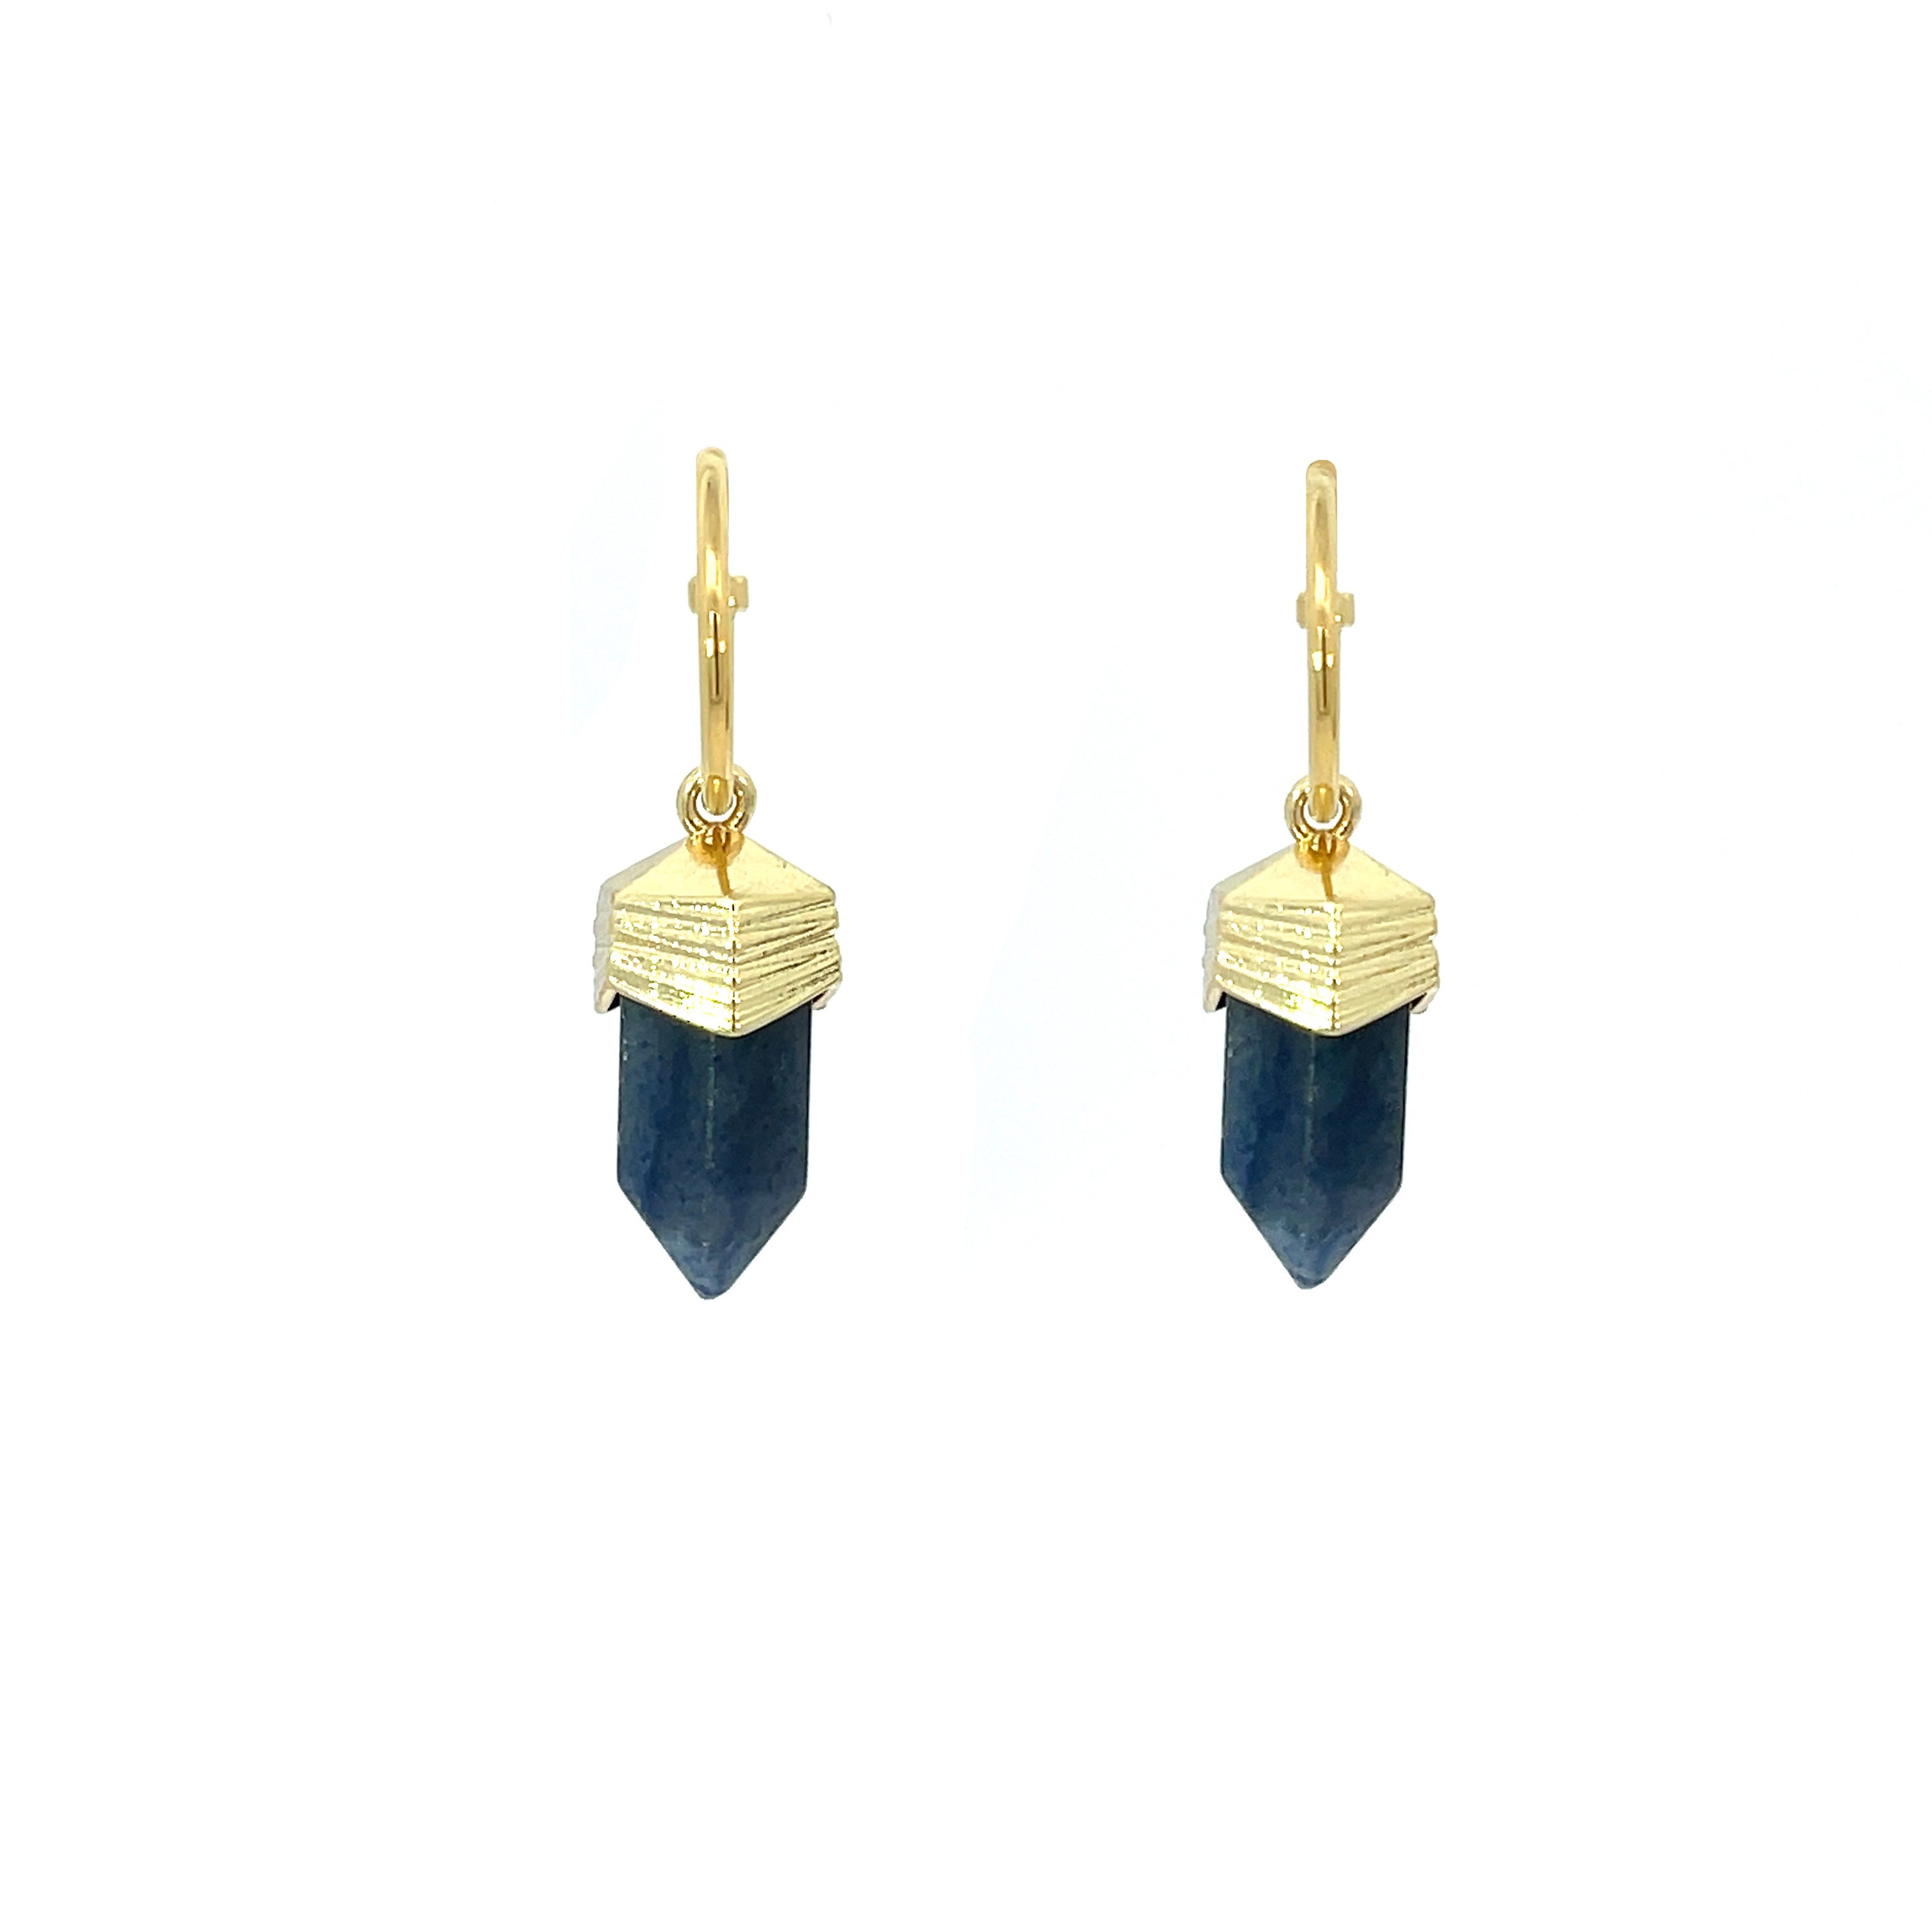 Shop the Exclusive Amari Crystal Hexagon Earrings in Blue Sodalite